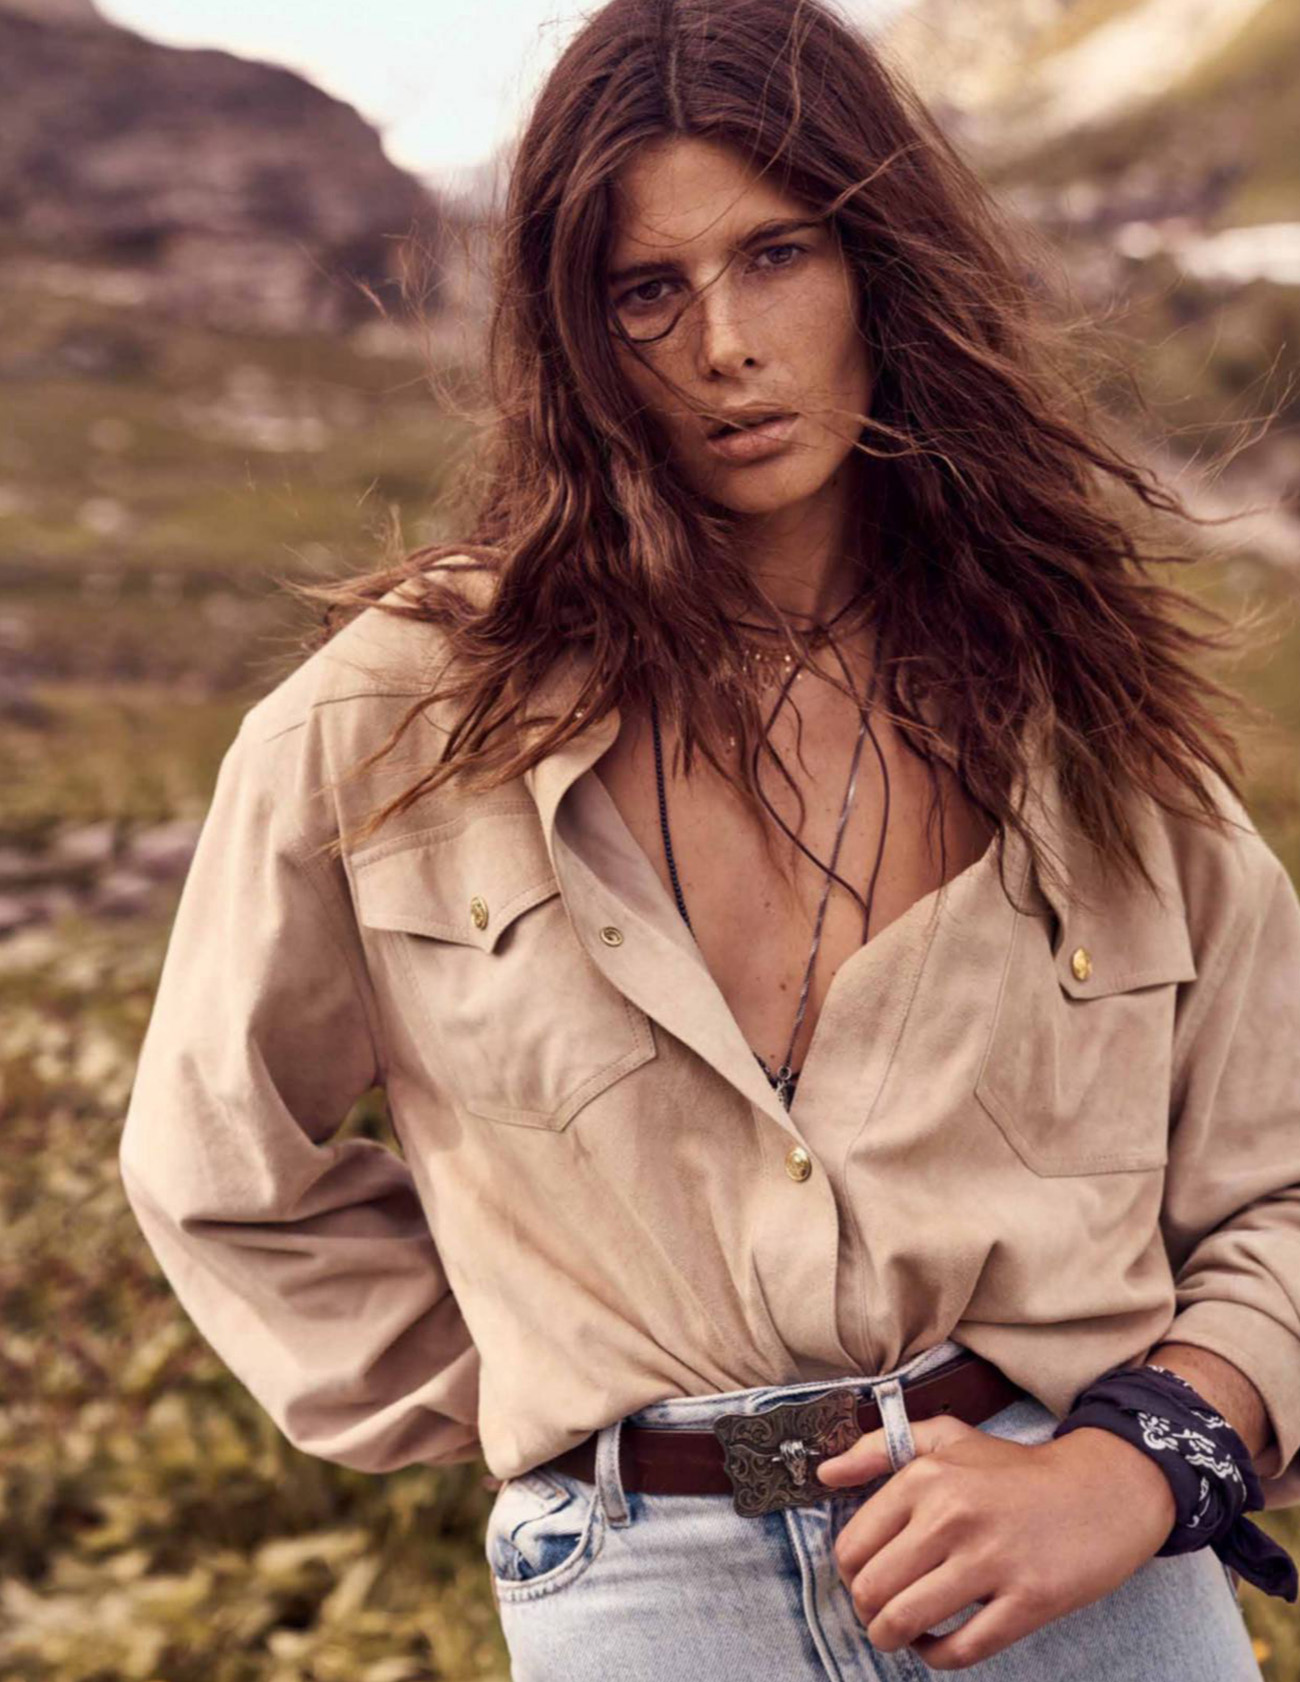 Monica Cima by Thiemo Sander for Madame Figaro October 29th, 2021